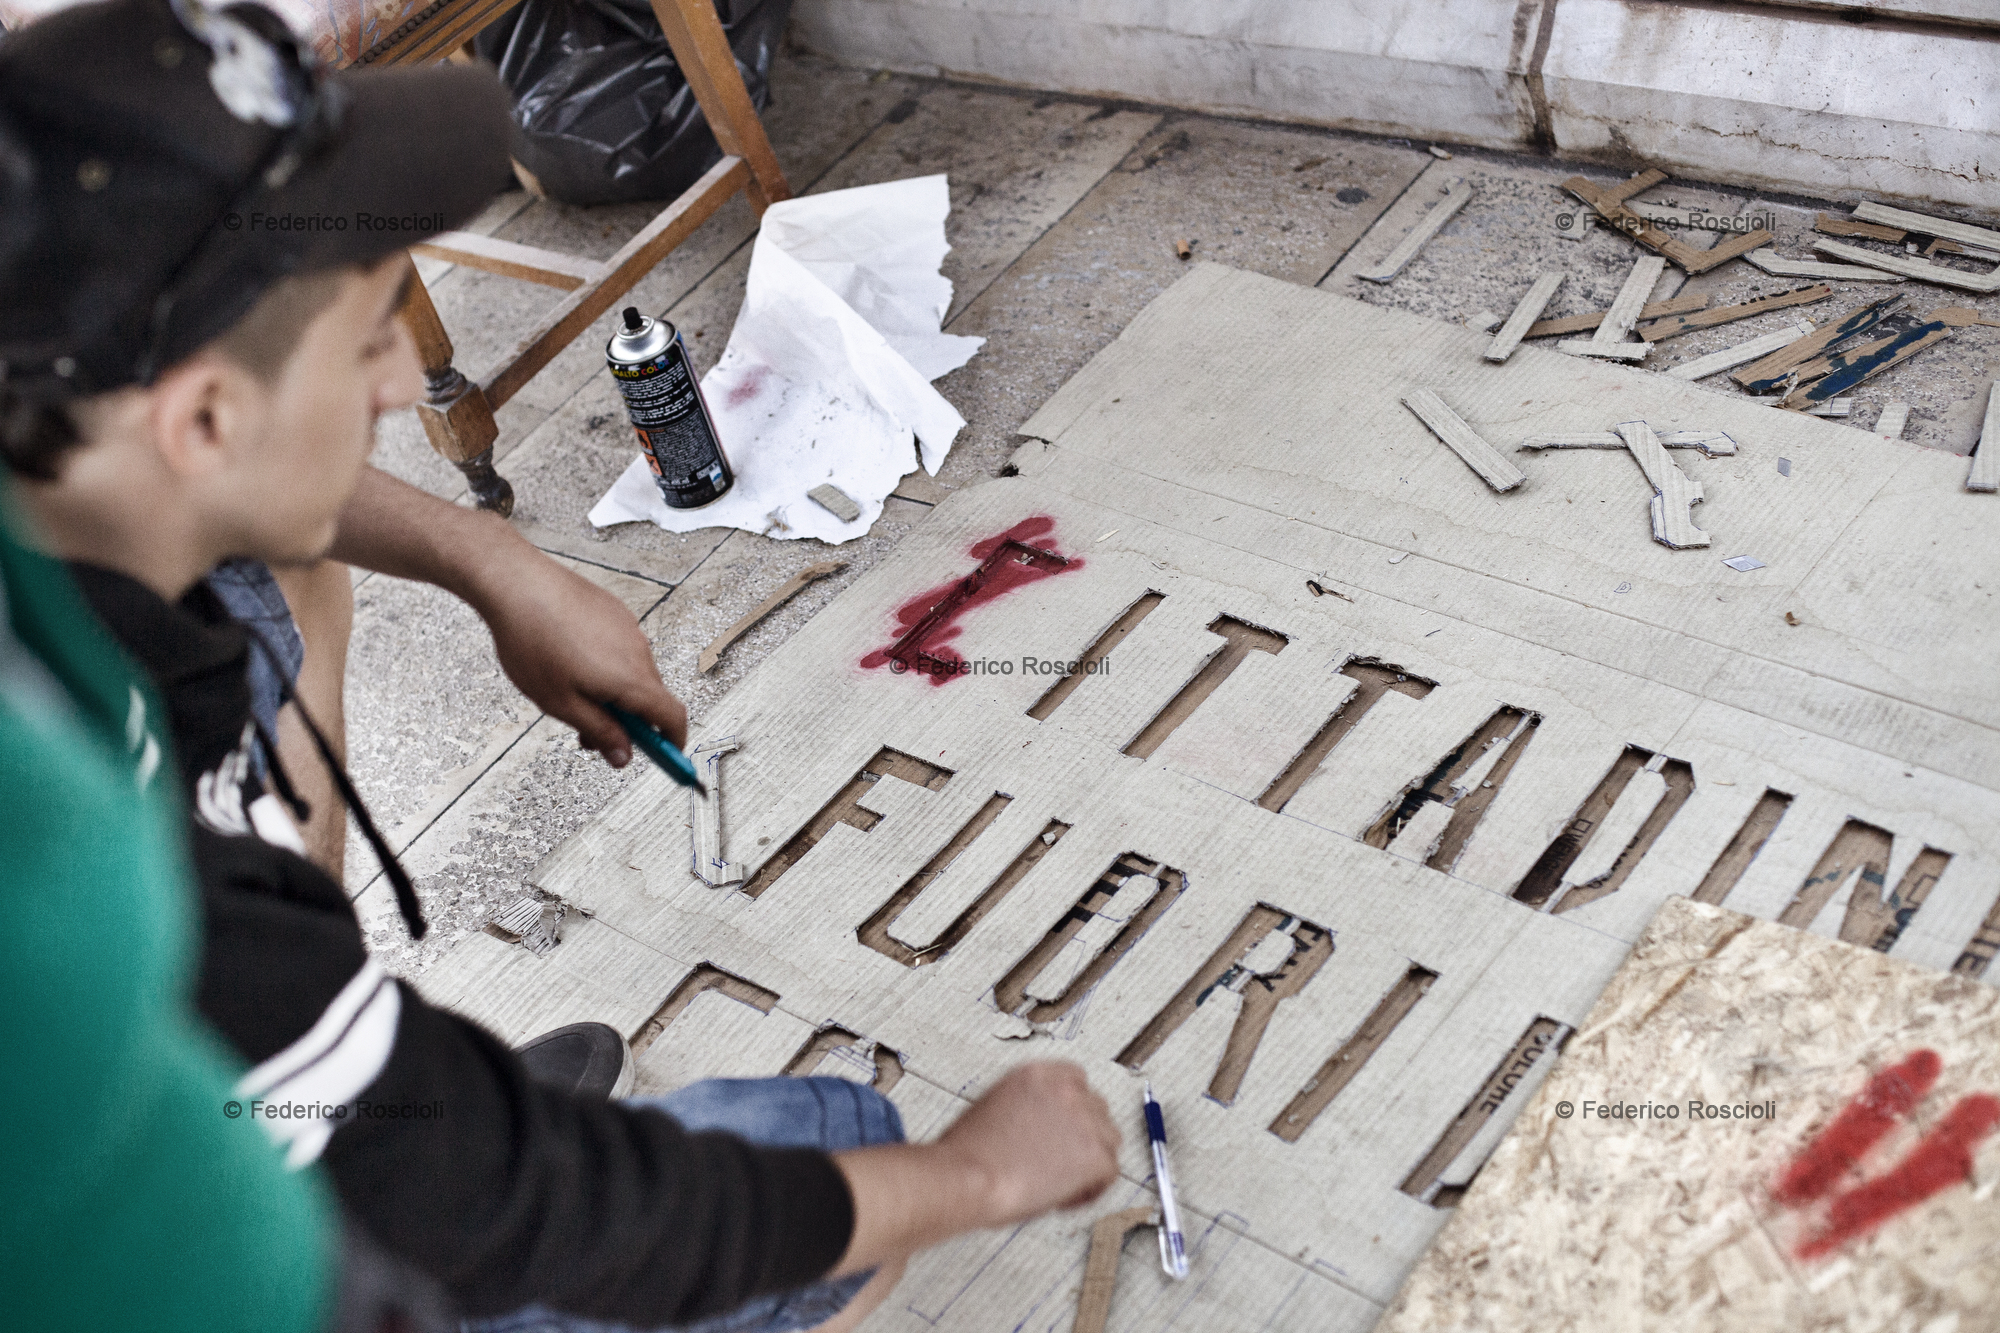 Taranto, Italy, September 23, 2013. The making of a stencil during the  fourteenth day of protests under the municipality of Taranto. This sit-in lasted 26 days and was organized by associations and citizens of Taranto united under the name of 'Cittadini #fuoridalcomune' (Citizens outside of the municipality building): they asked more attention and participation by the local institution on environmental issues.